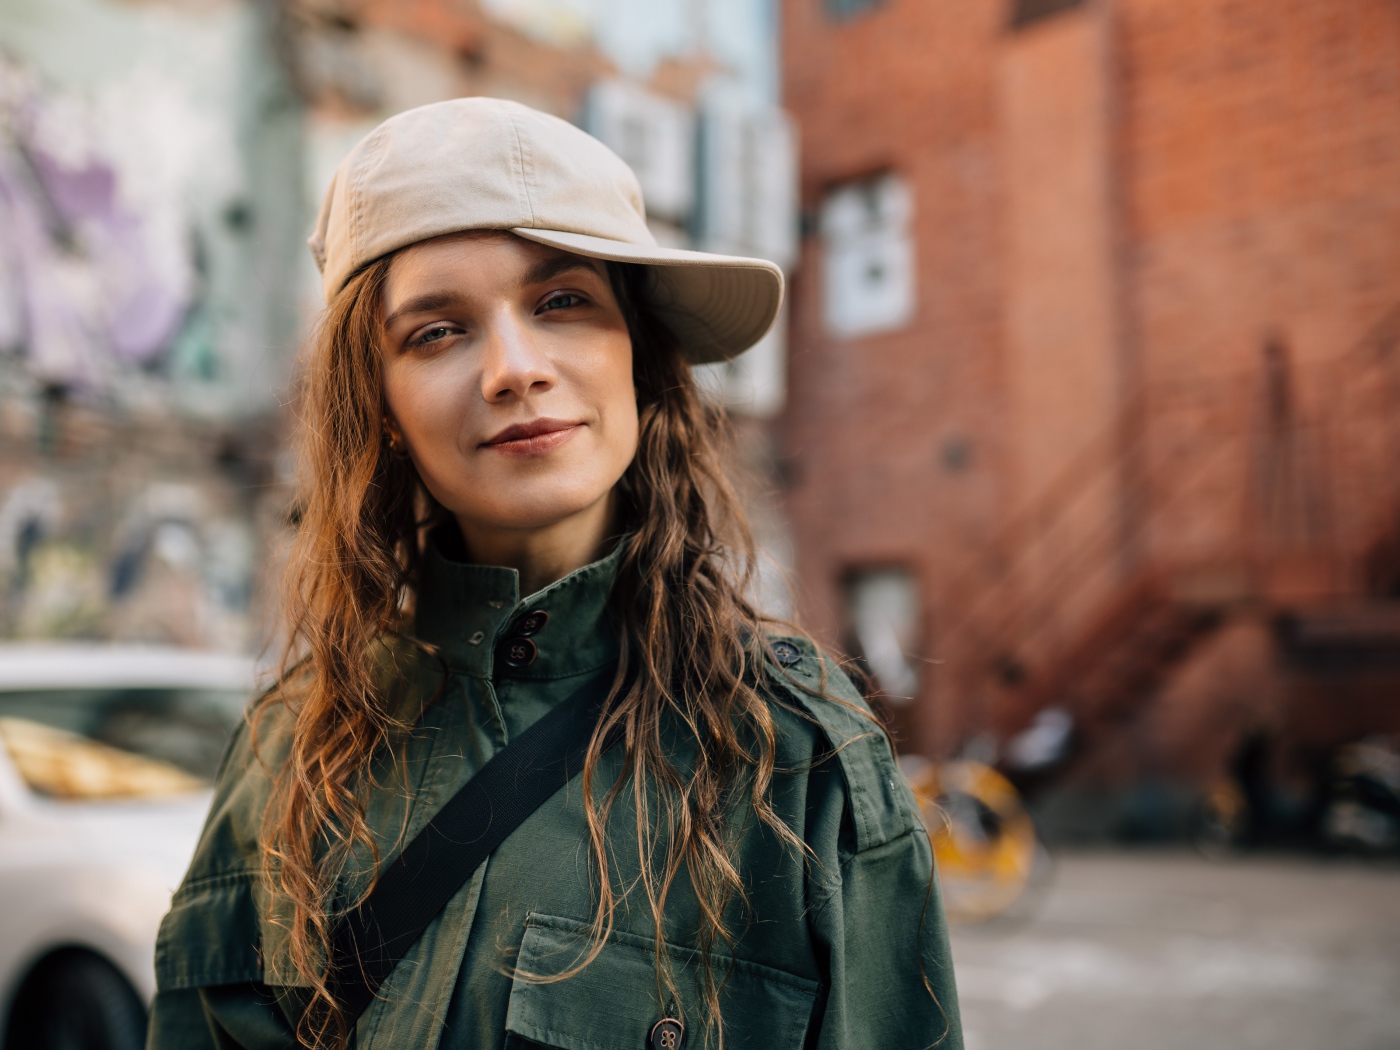 Young fashionable girl in a cap in the city